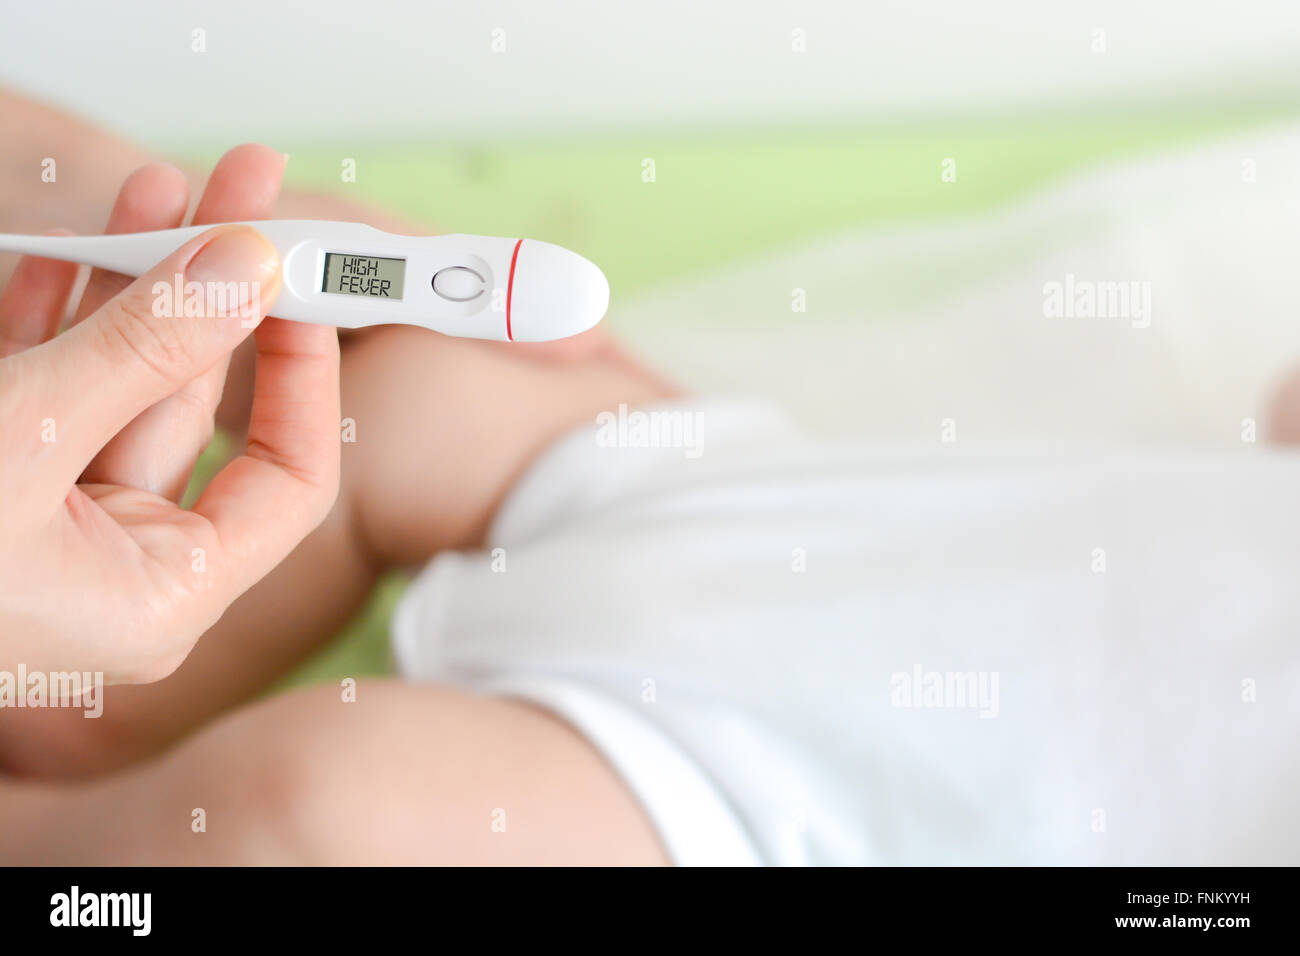 Checking baby temperature which indicates high fever on thermometer Stock Photo